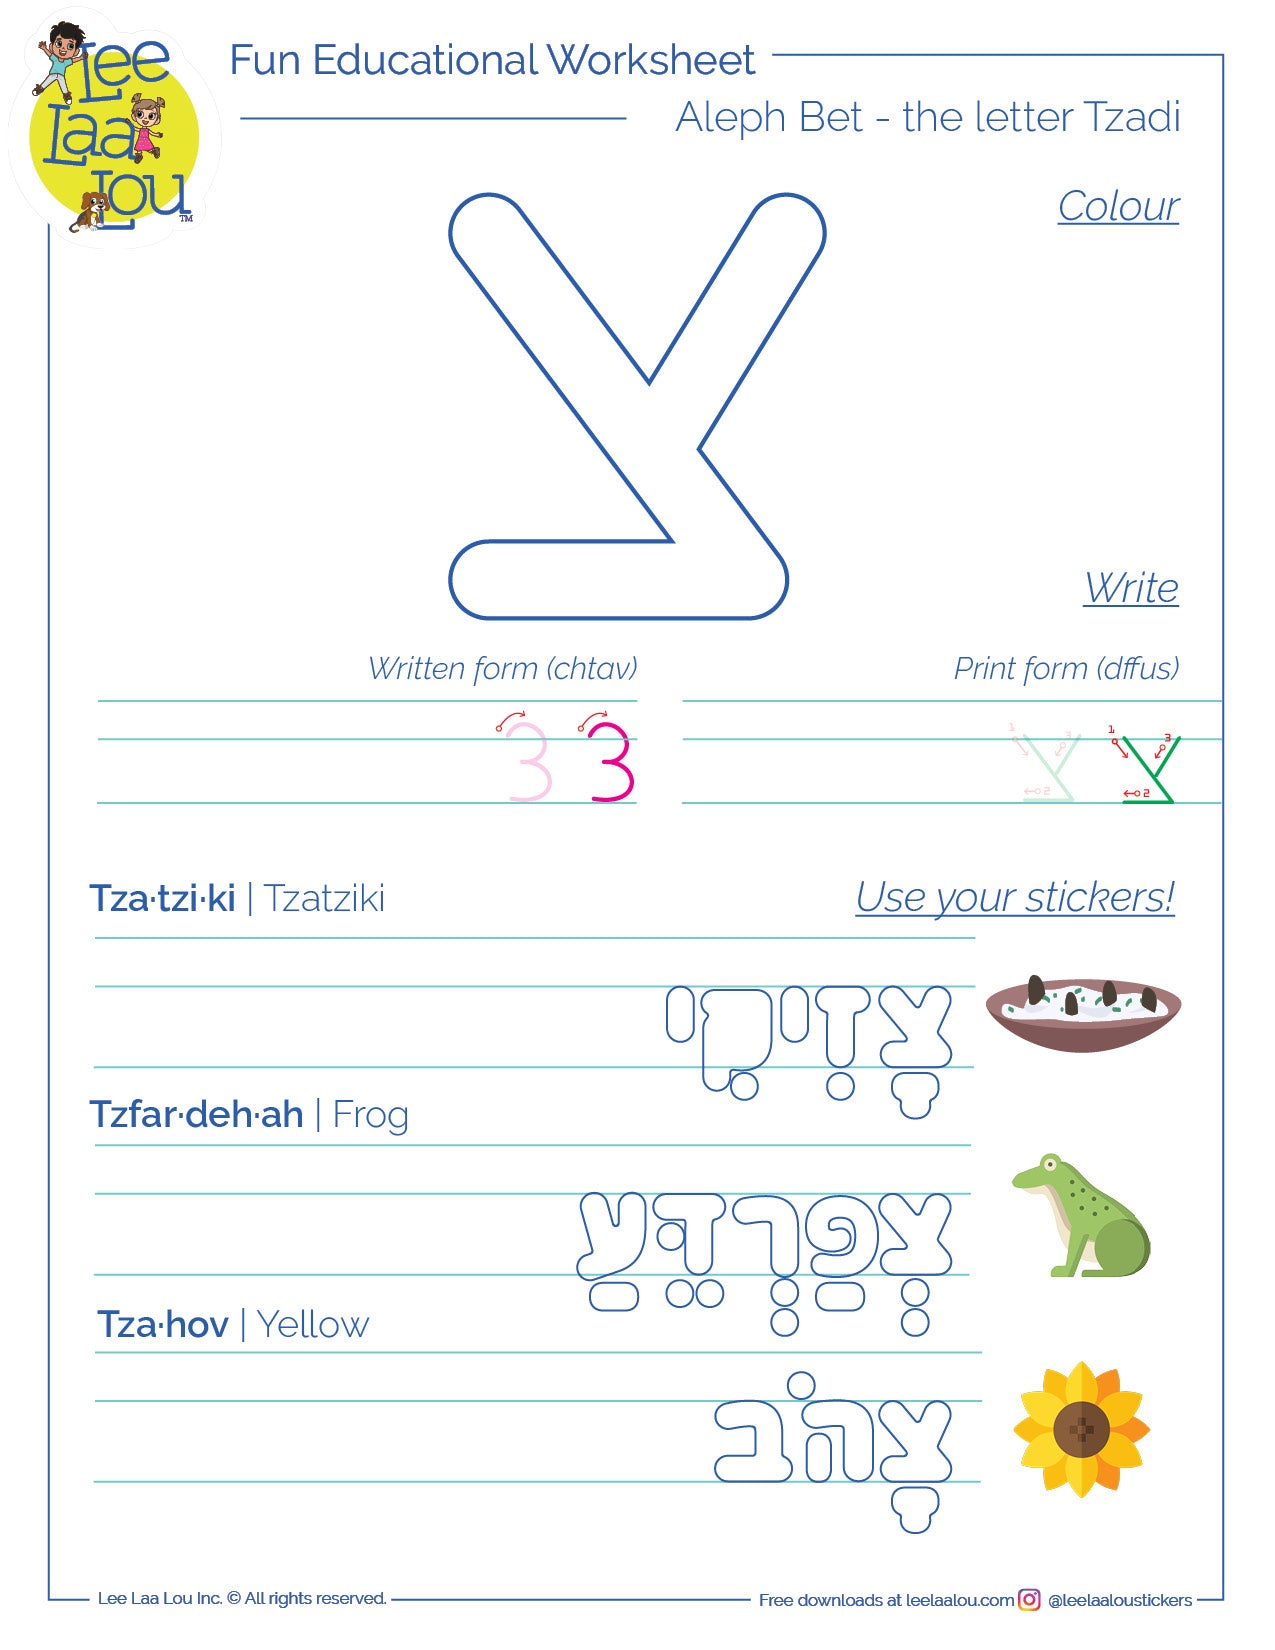 The 18th letter of the Hebrew alphabet - tzadi - activity sheet - האות צדי דף עבודה